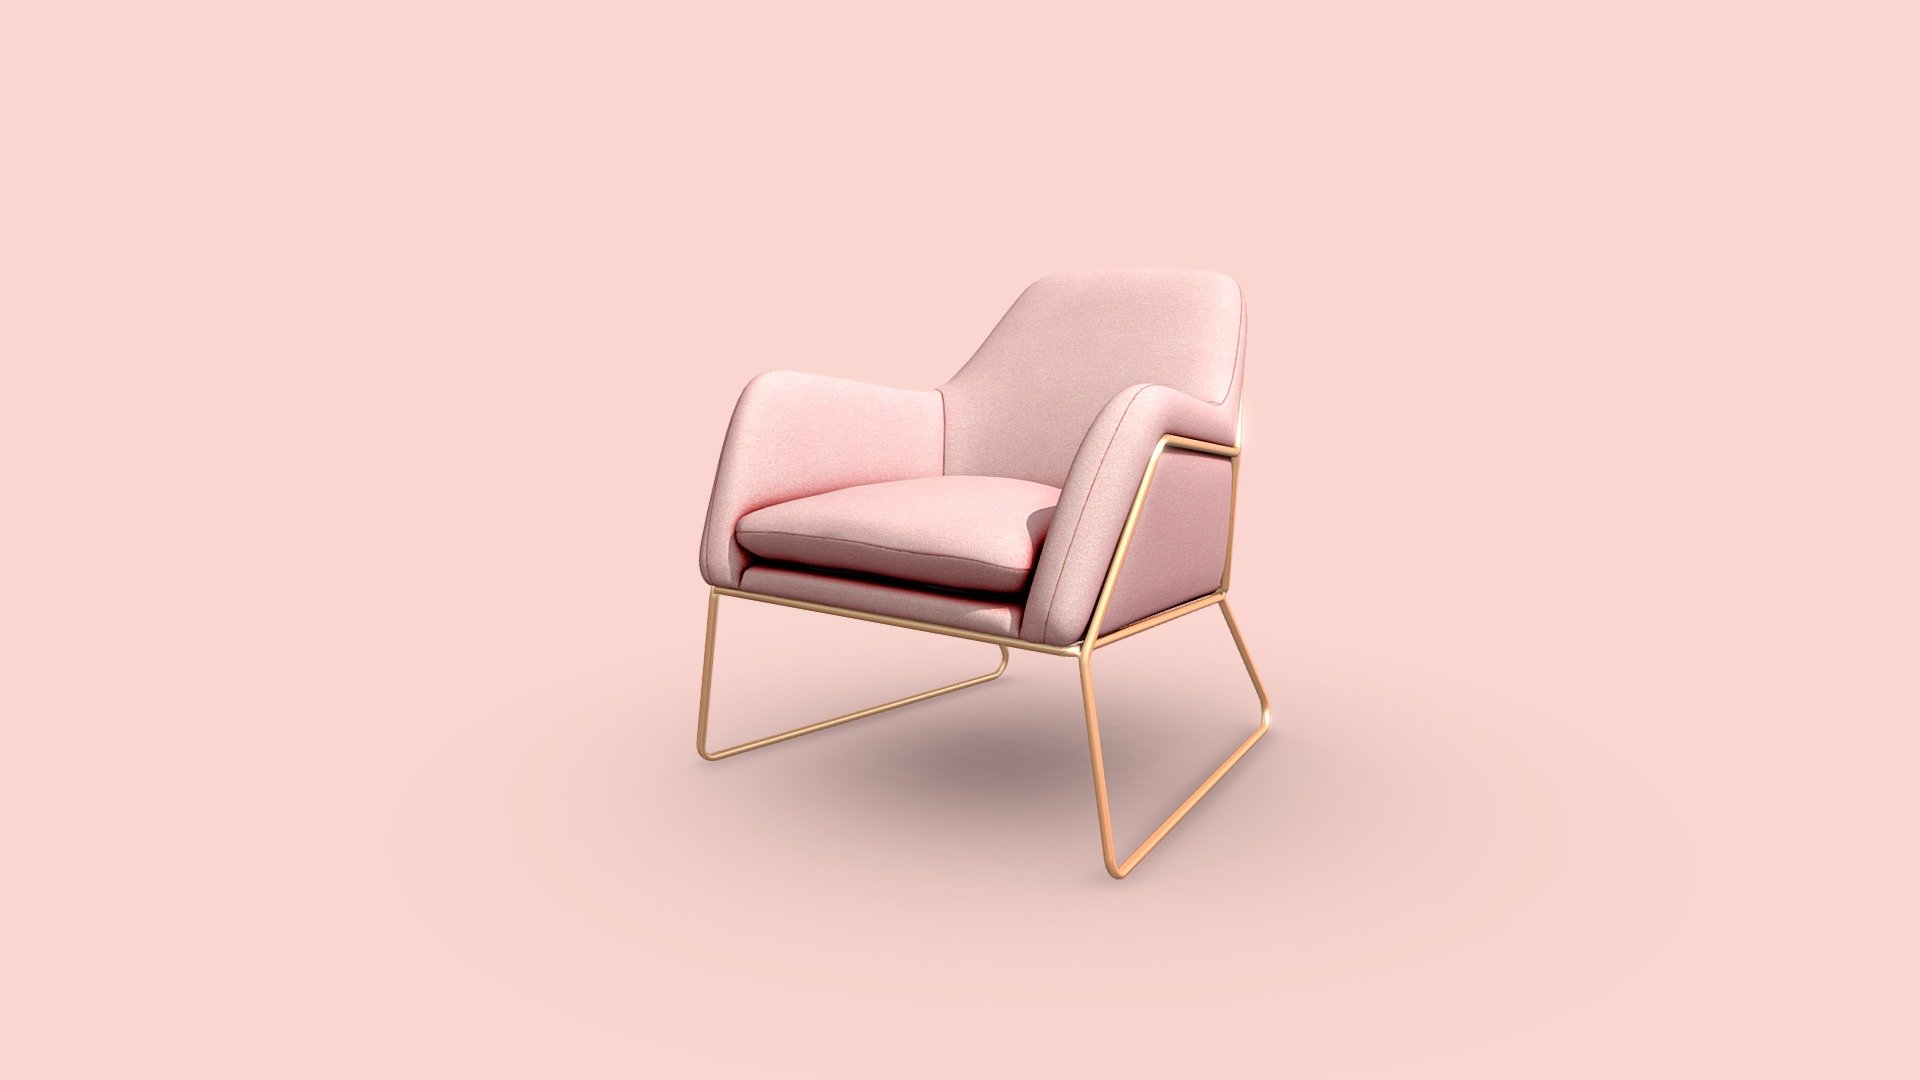 PINK DINNING ARMCHAIR WITH GOLDEN LEGS
A lovely stylish and very comfortable armchair perfect for the living room and dining area of the interior. The powdery pink shade will add warmth, comfort and feminine softness to your designs 3d model